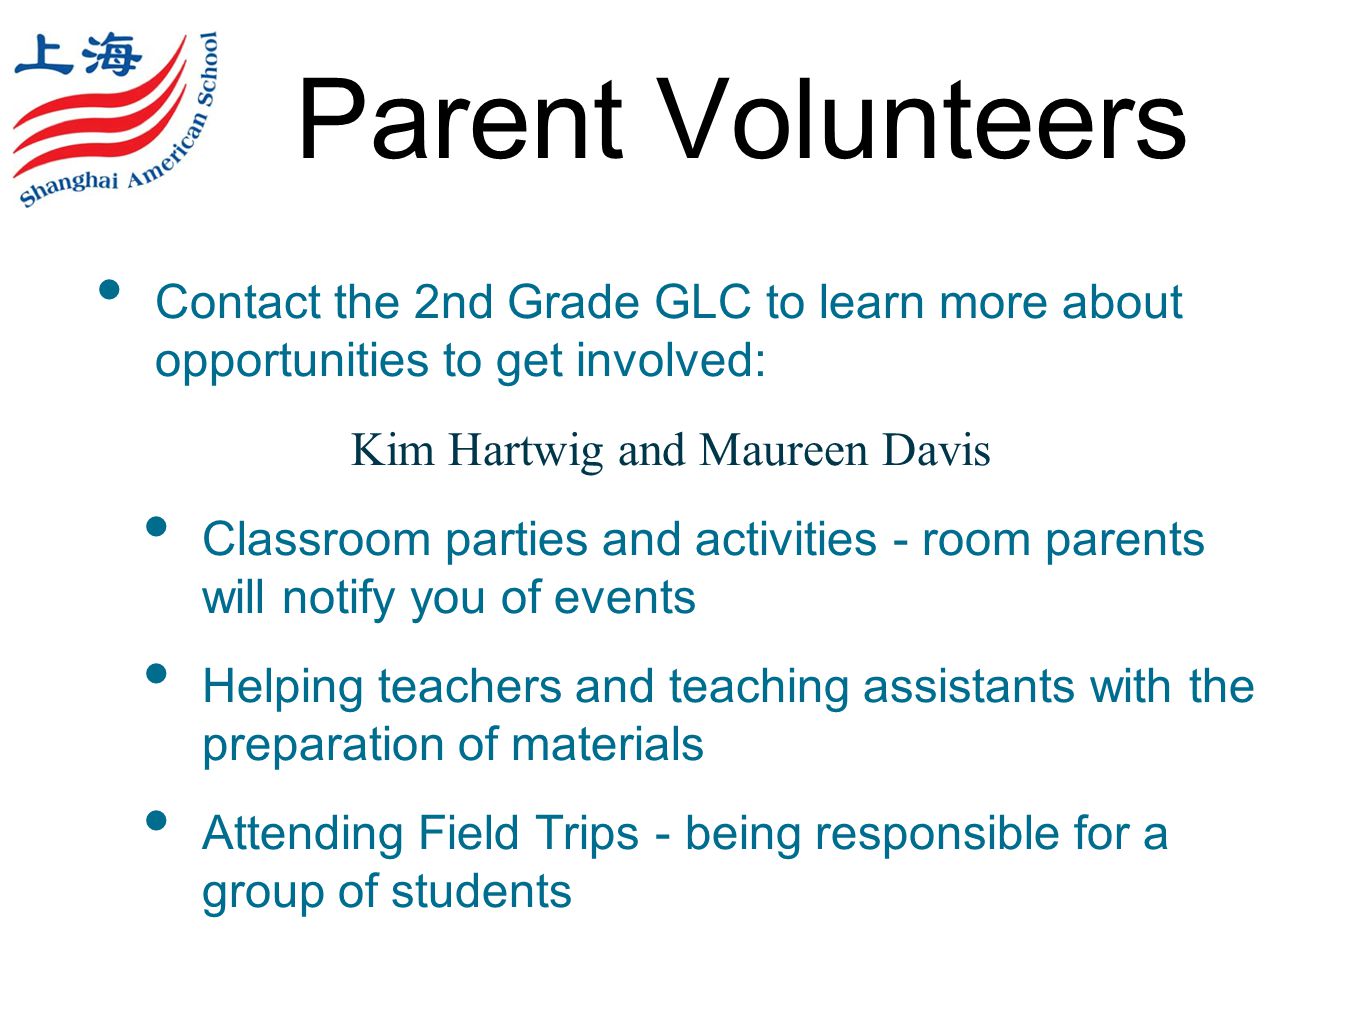 Parent Volunteers Contact the 2nd Grade GLC to learn more about opportunities to get involved: Kim Hartwig and Maureen Davis Classroom parties and activities - room parents will notify you of events Helping teachers and teaching assistants with the preparation of materials Attending Field Trips - being responsible for a group of students